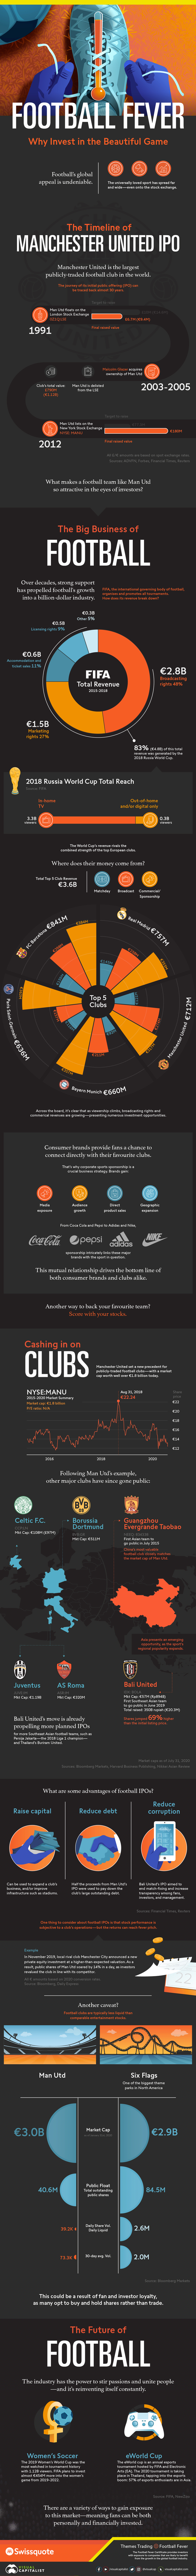 Football Fever Investing Infographic